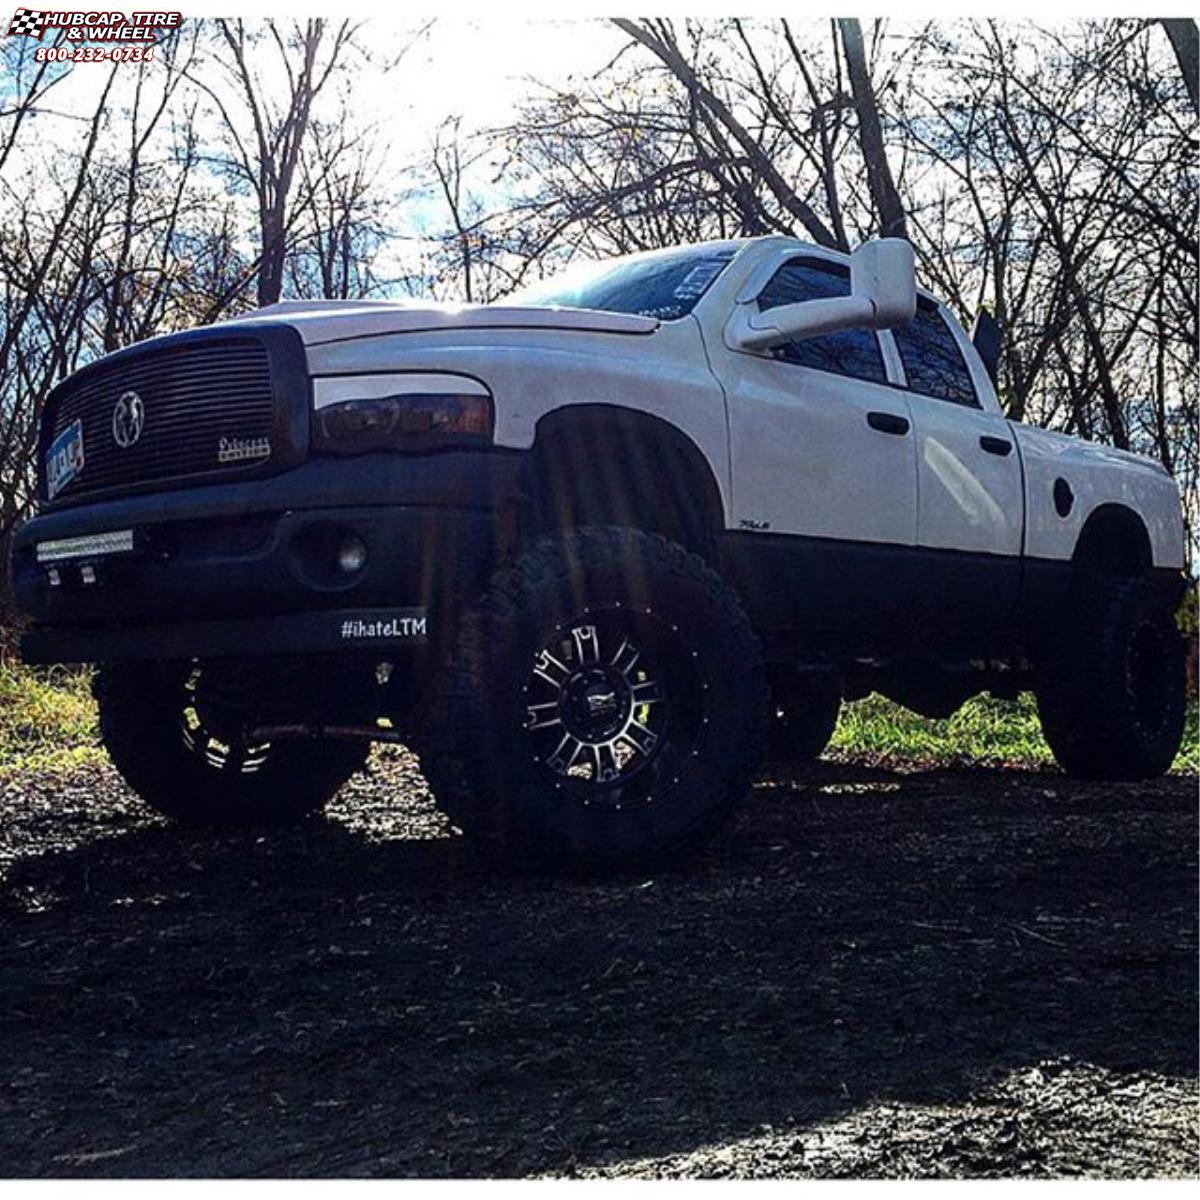 vehicle gallery/ram 1500 xd series xd809 riot x  Matte Black Machined wheels and rims